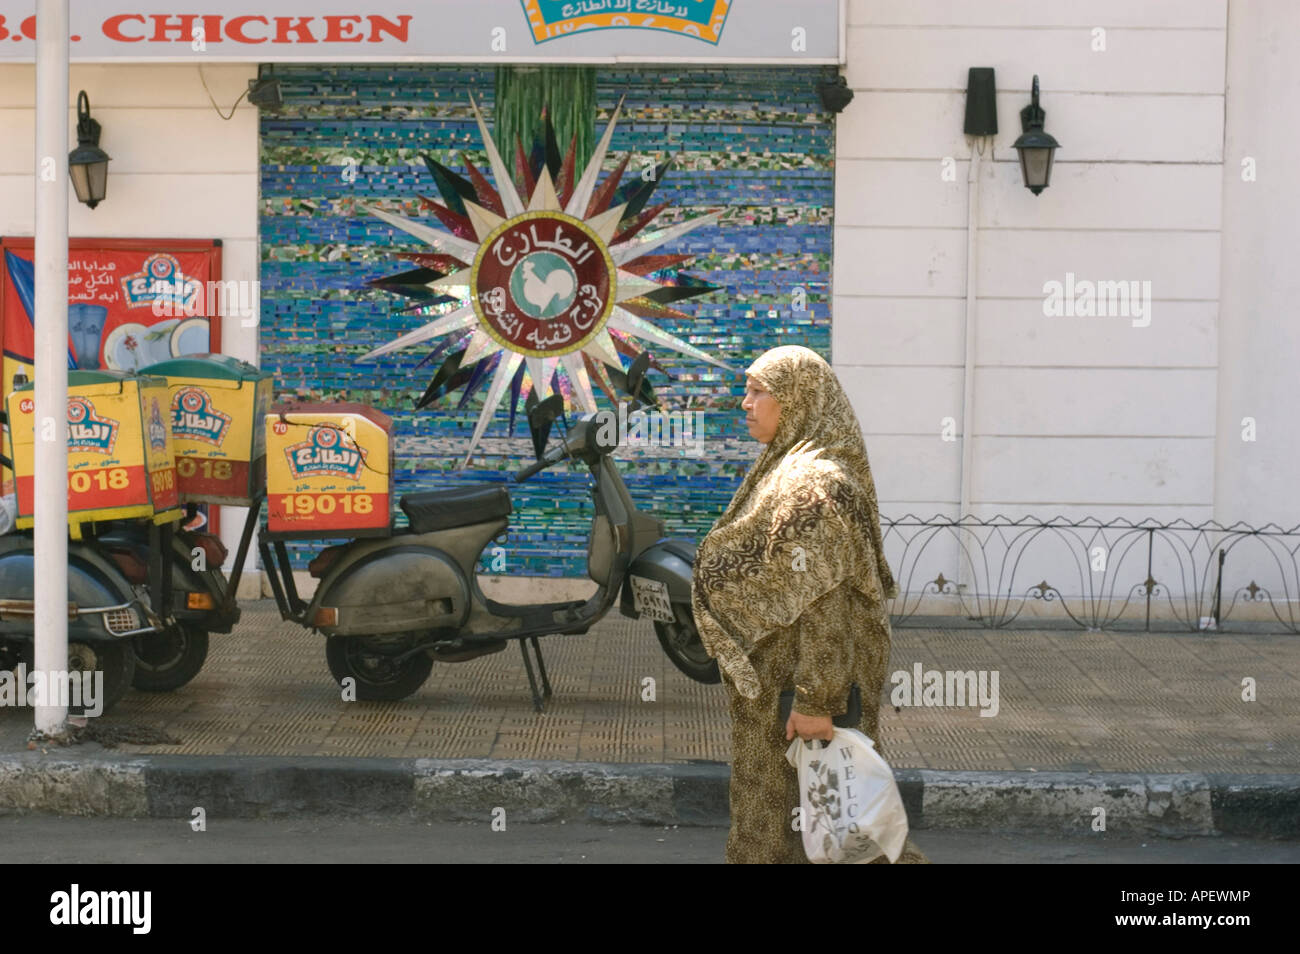 Woman with head covering and shopping bag walks on Alexandria Egypt street in front of fast food restaurant Stock Photo